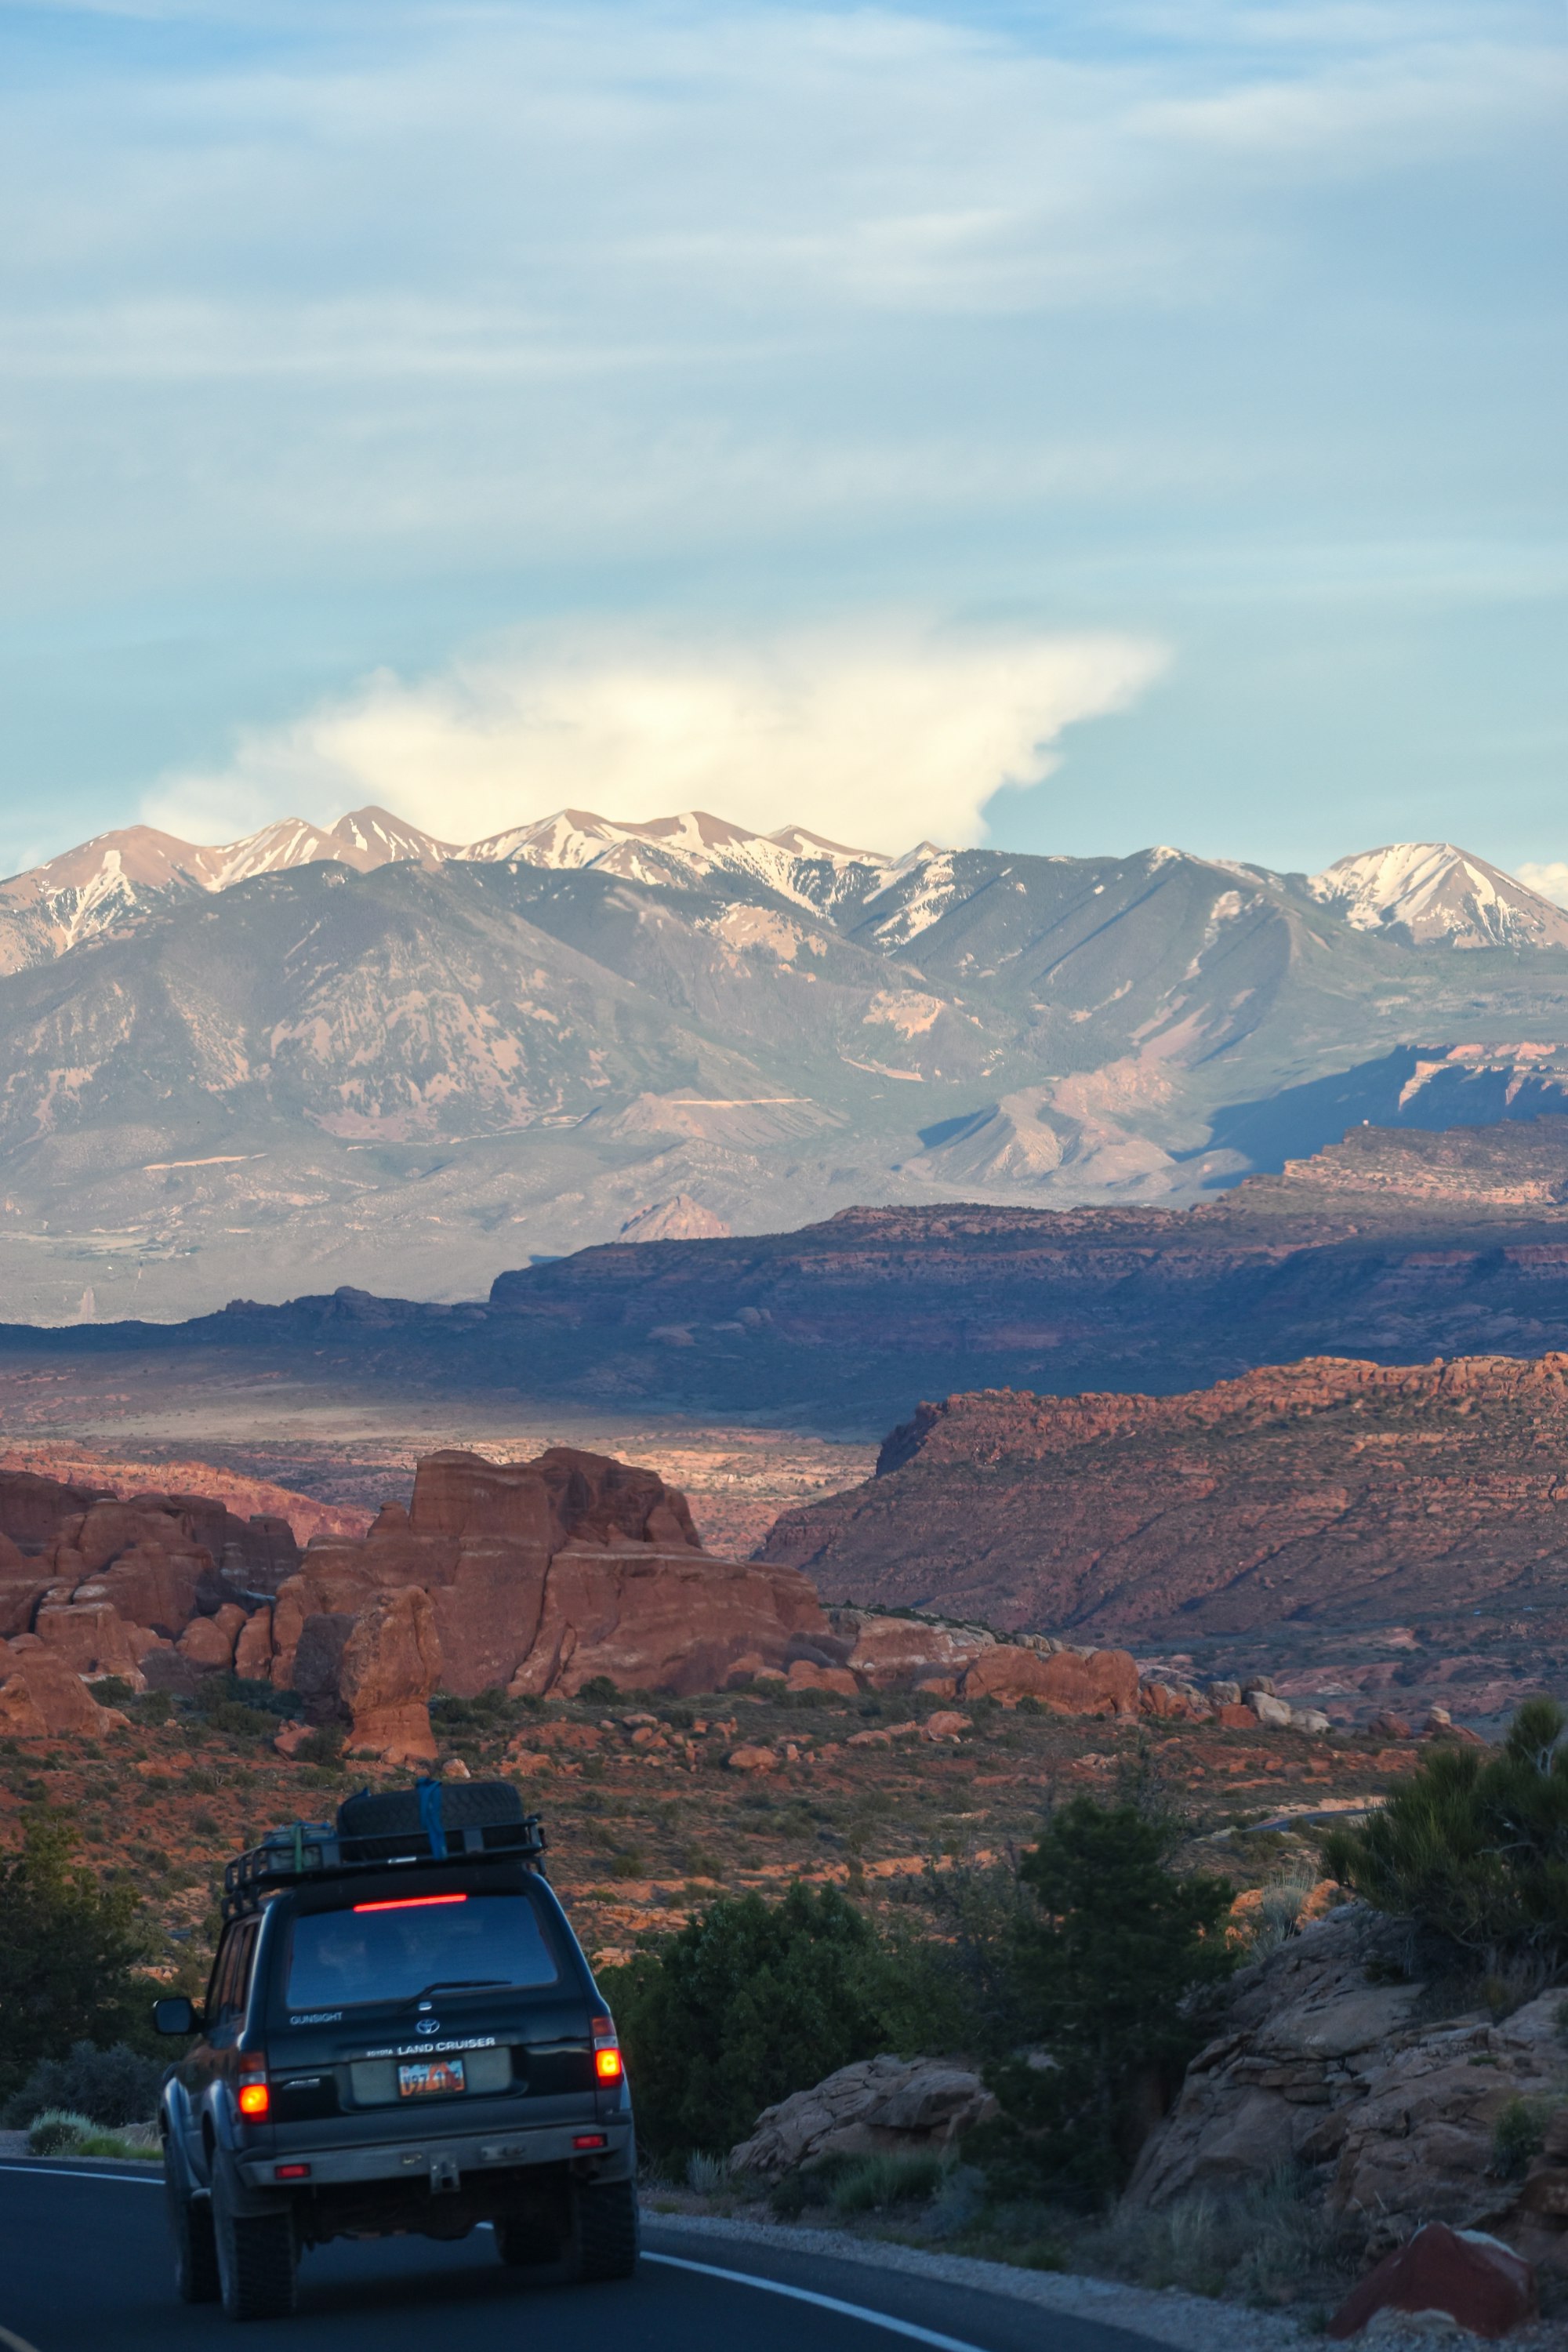 How to Find a Long Term Rental in Moab